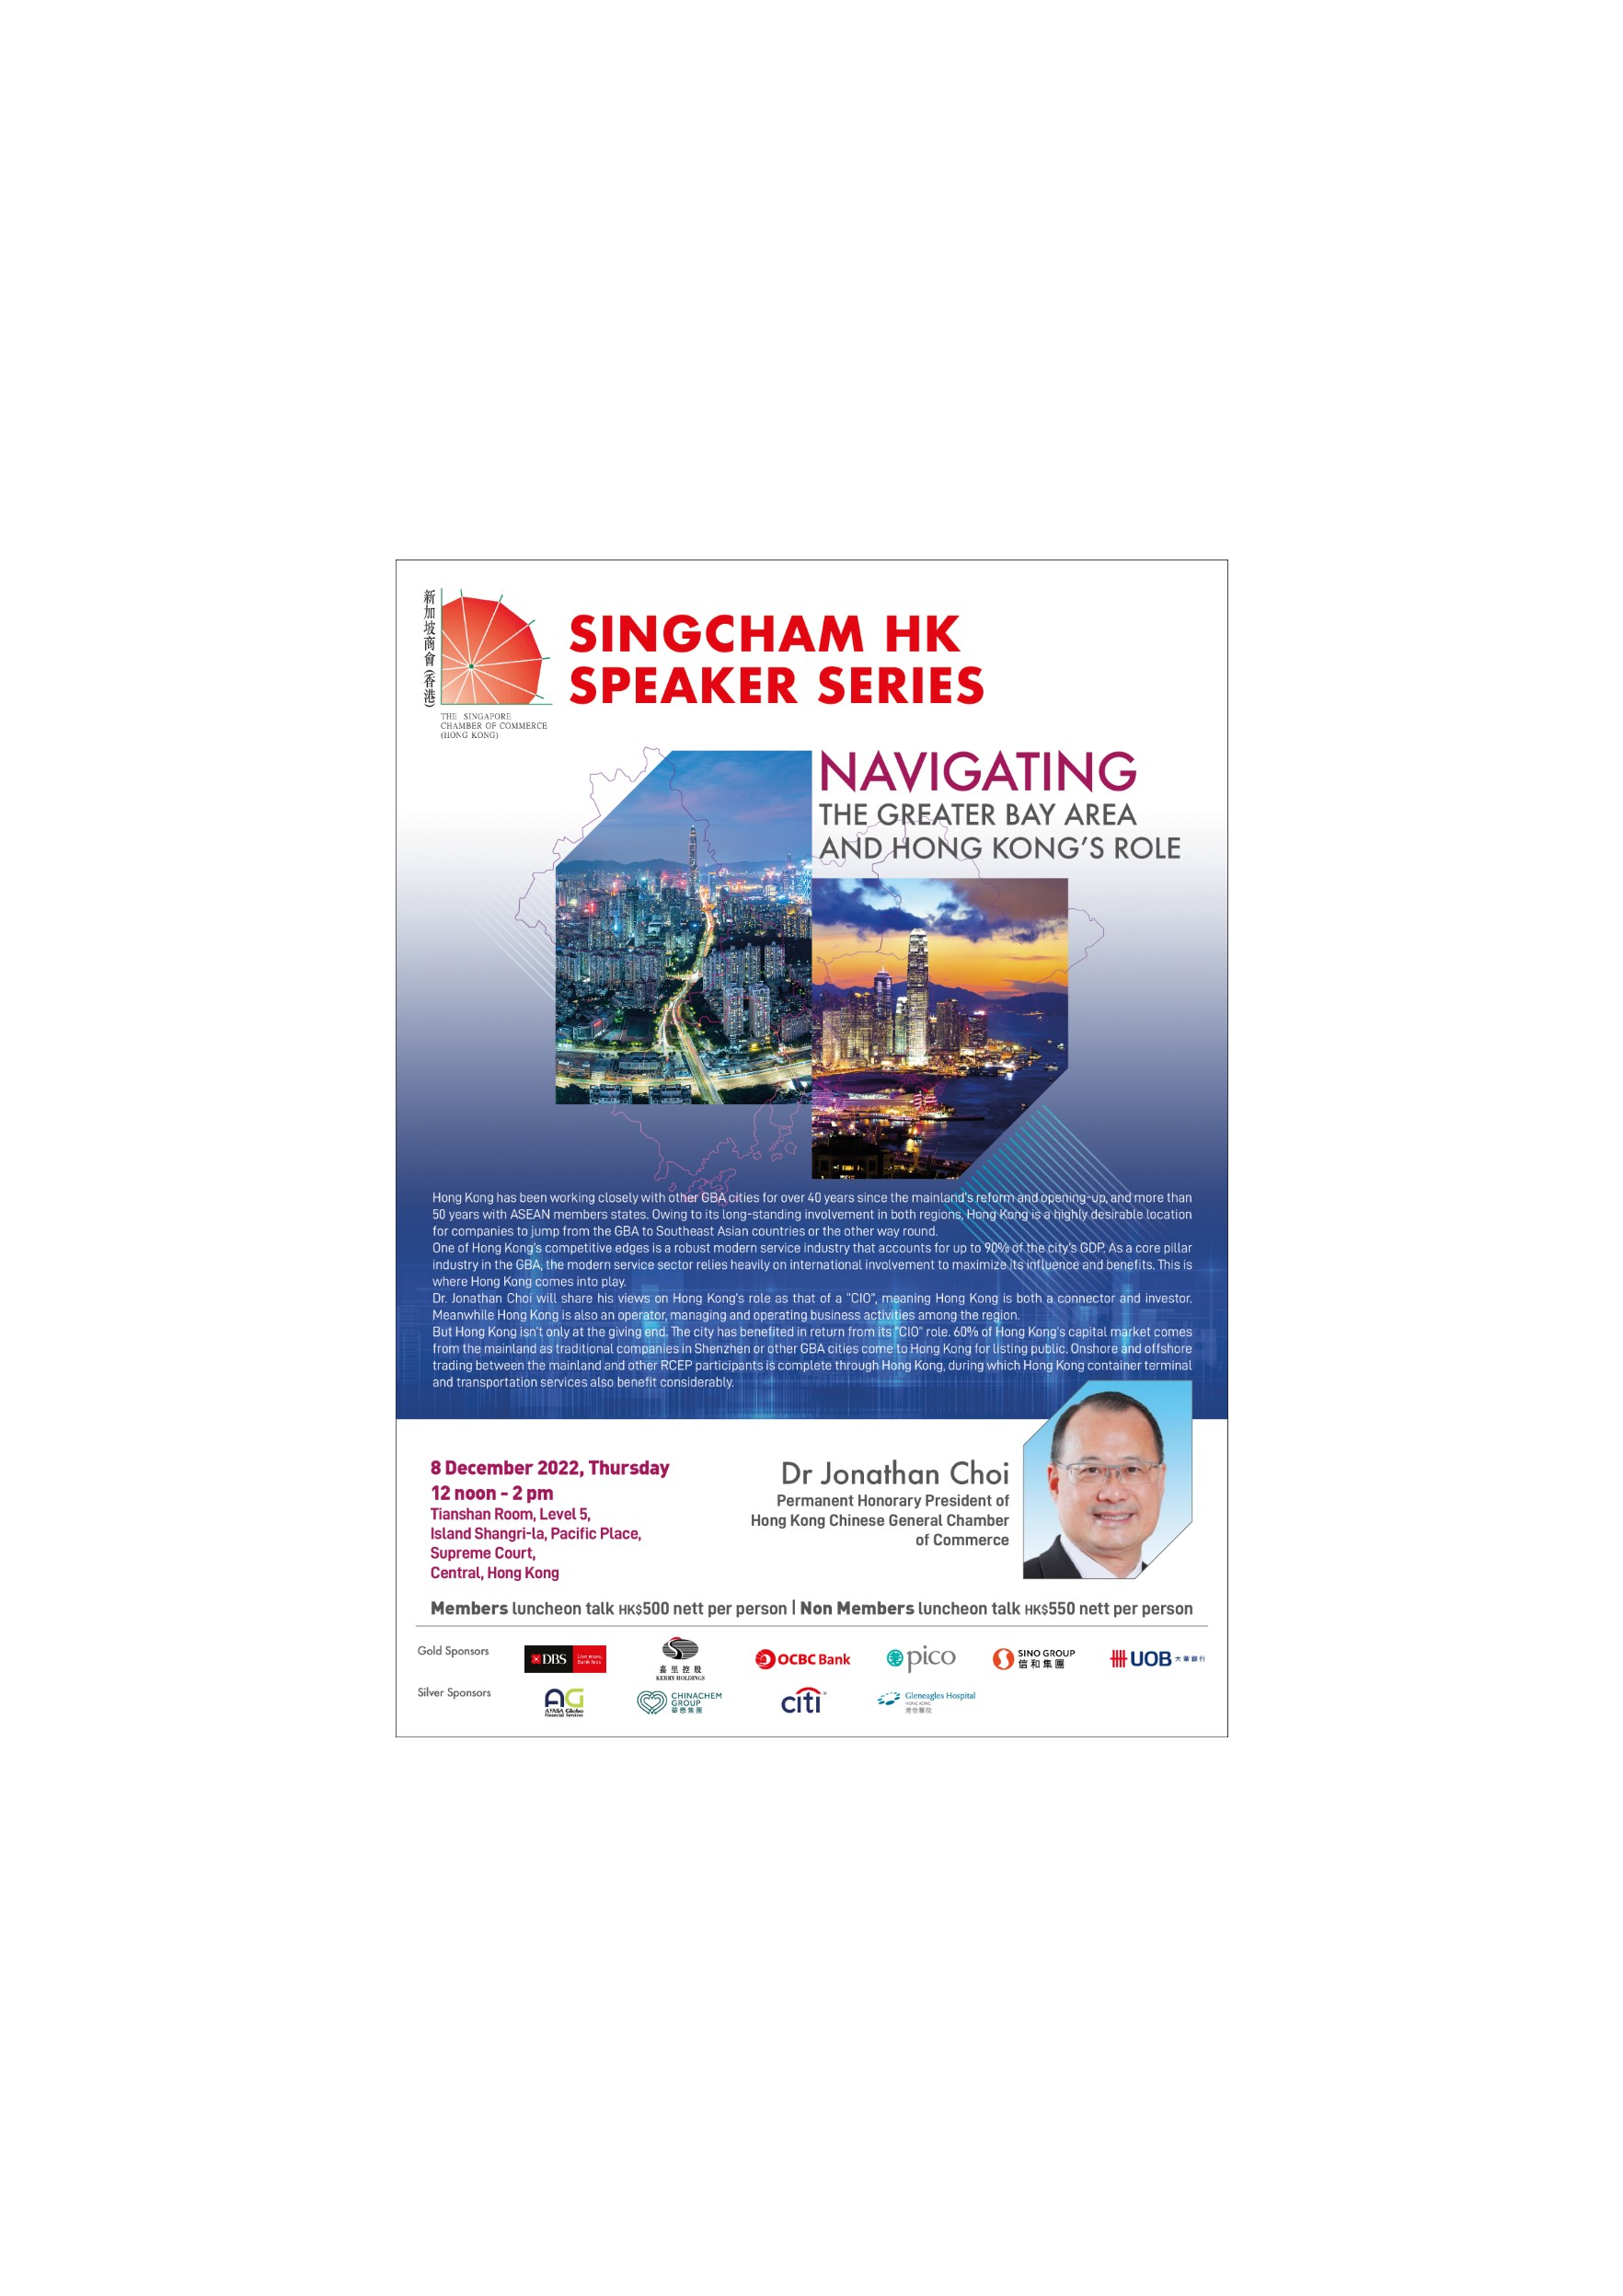 thumbnails [SingCham HK Speaker Series] Luncheon Talk on "Navigating The Greater Bay Area and Hong Kong's Role" by Dr Jonathan Choi of HK Chinese General Chamber of Commerce (HKCGCC)